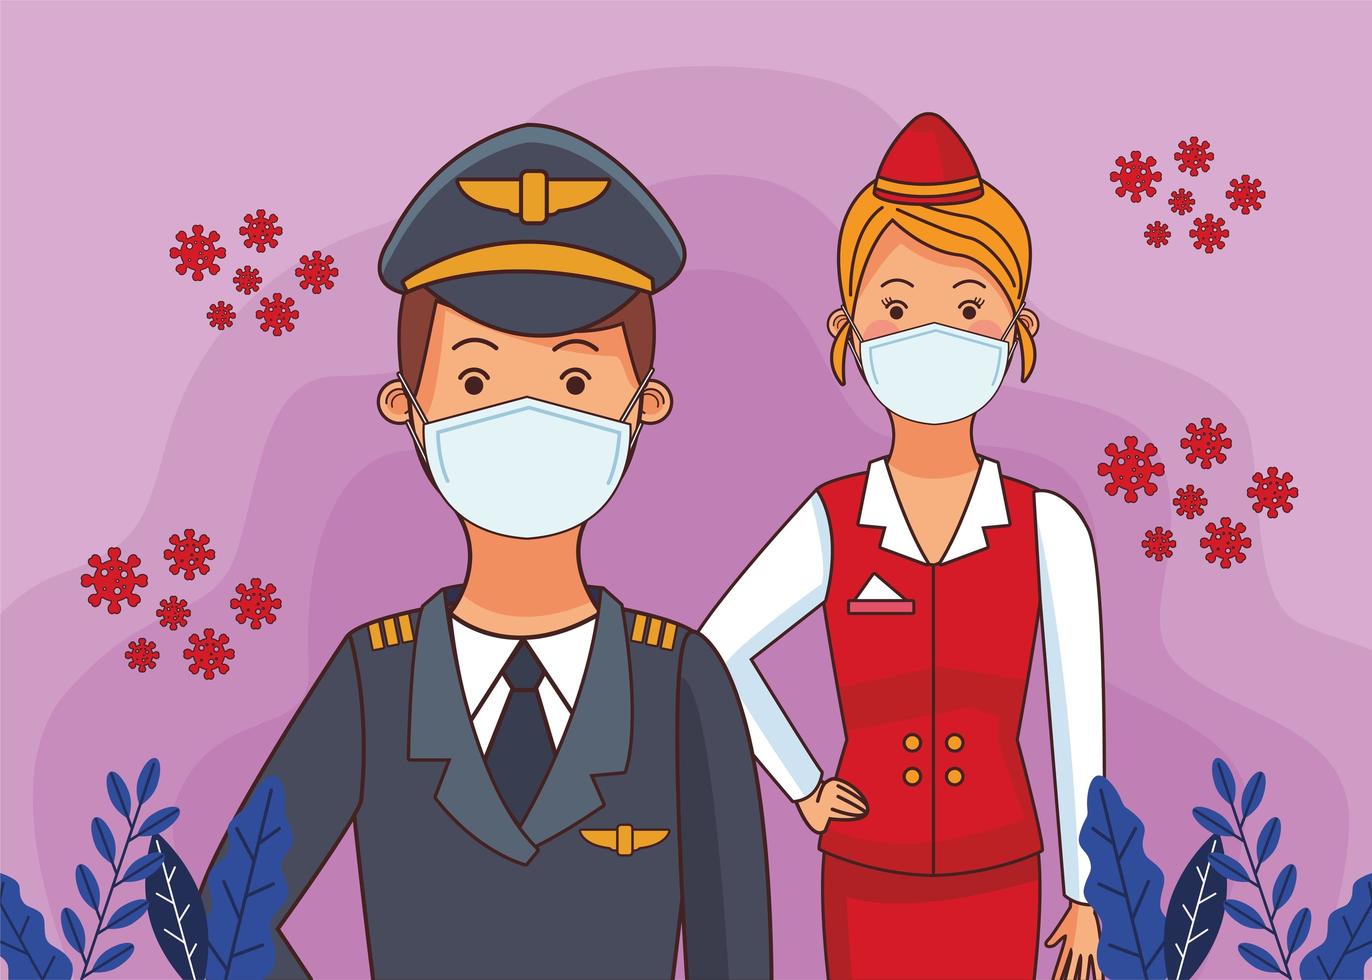 pilot worker and stewardess using face masks vector